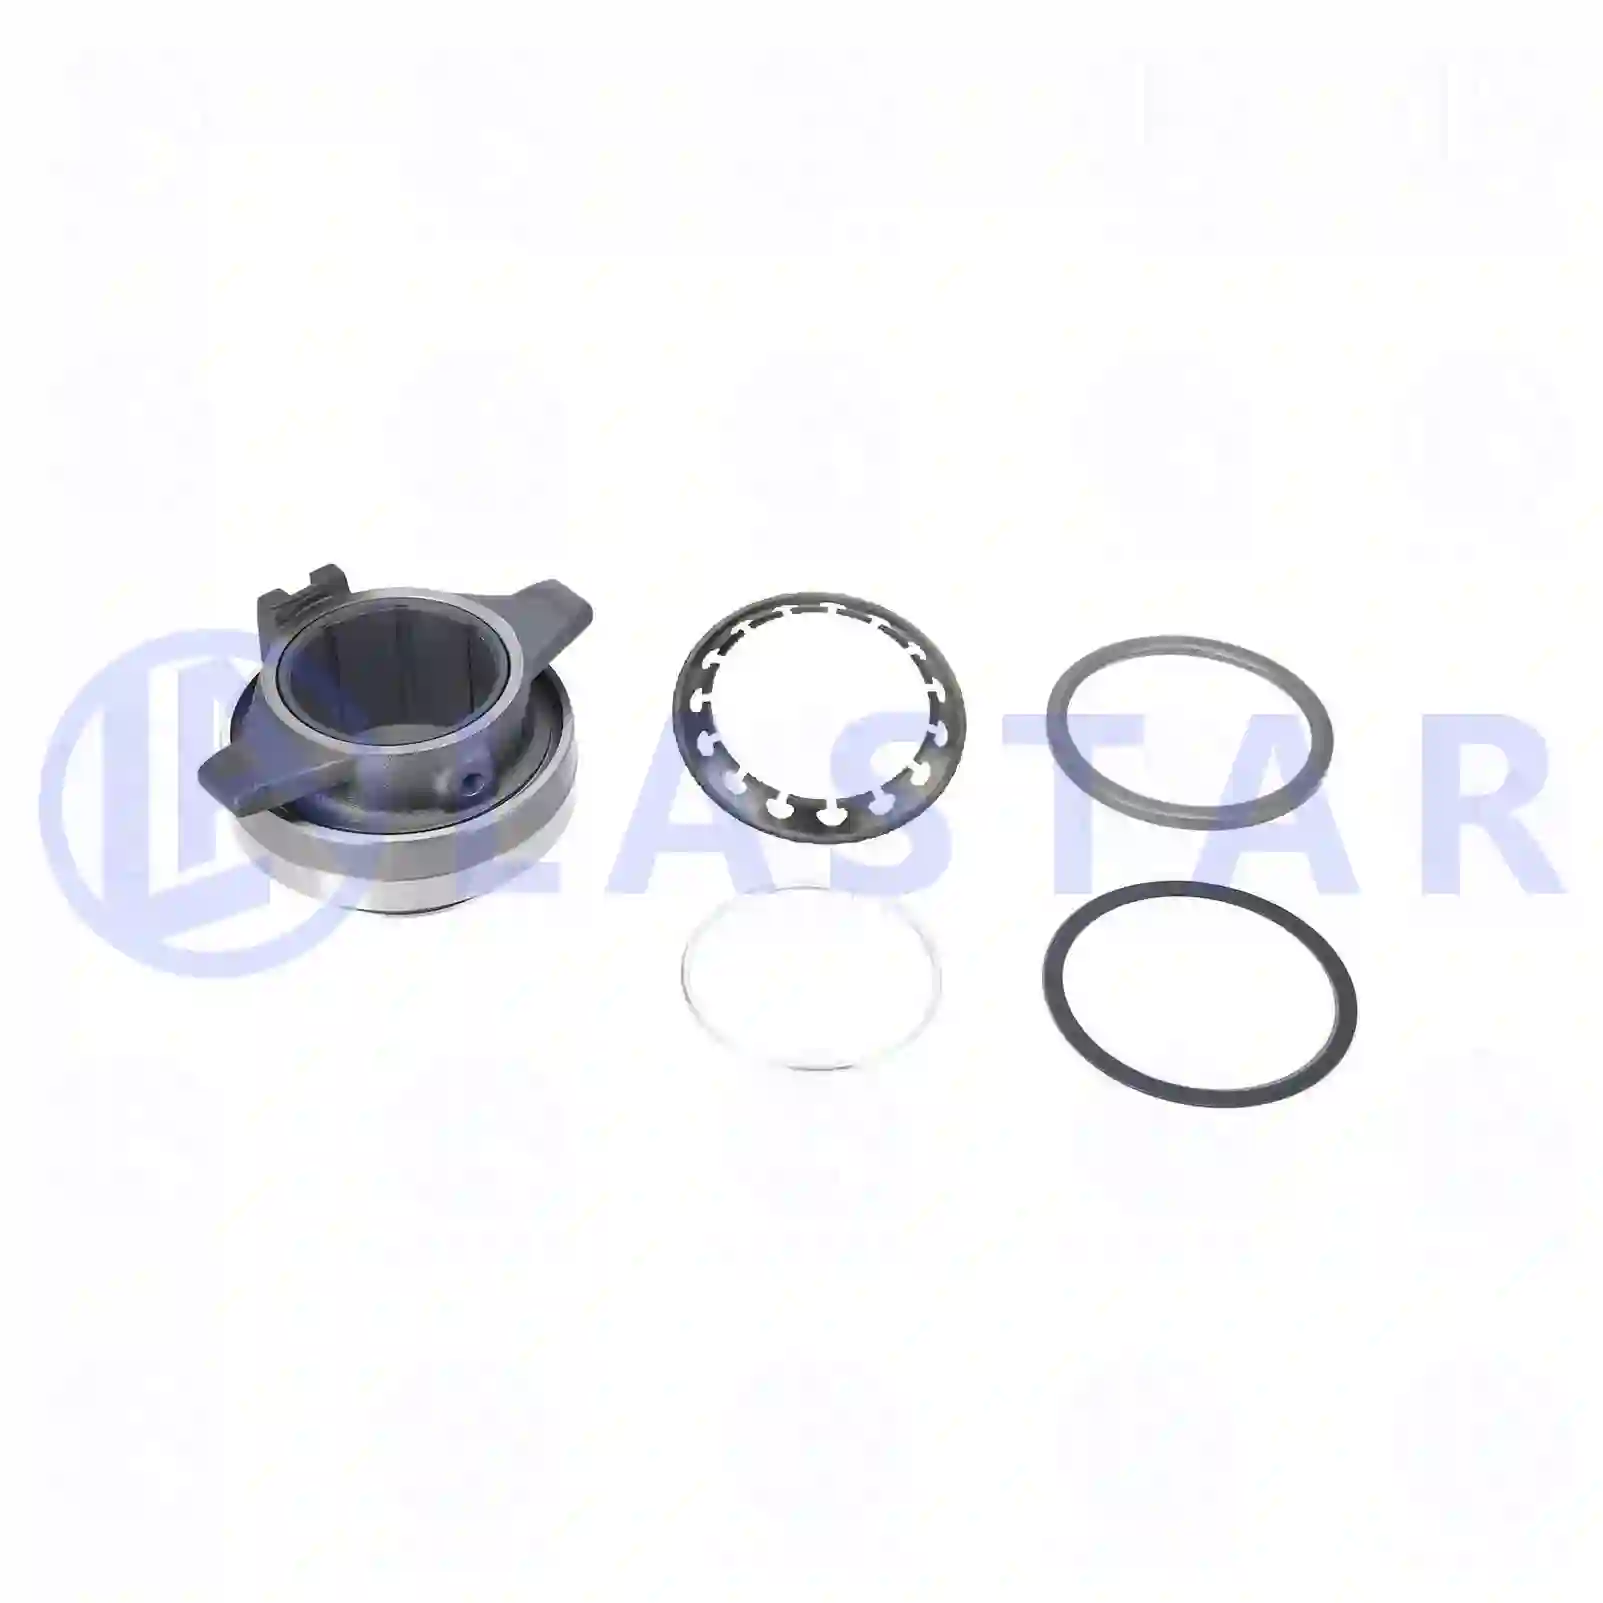 Release bearing, 77722112, 1327025, 1373276, 1393162, 393162 ||  77722112 Lastar Spare Part | Truck Spare Parts, Auotomotive Spare Parts Release bearing, 77722112, 1327025, 1373276, 1393162, 393162 ||  77722112 Lastar Spare Part | Truck Spare Parts, Auotomotive Spare Parts